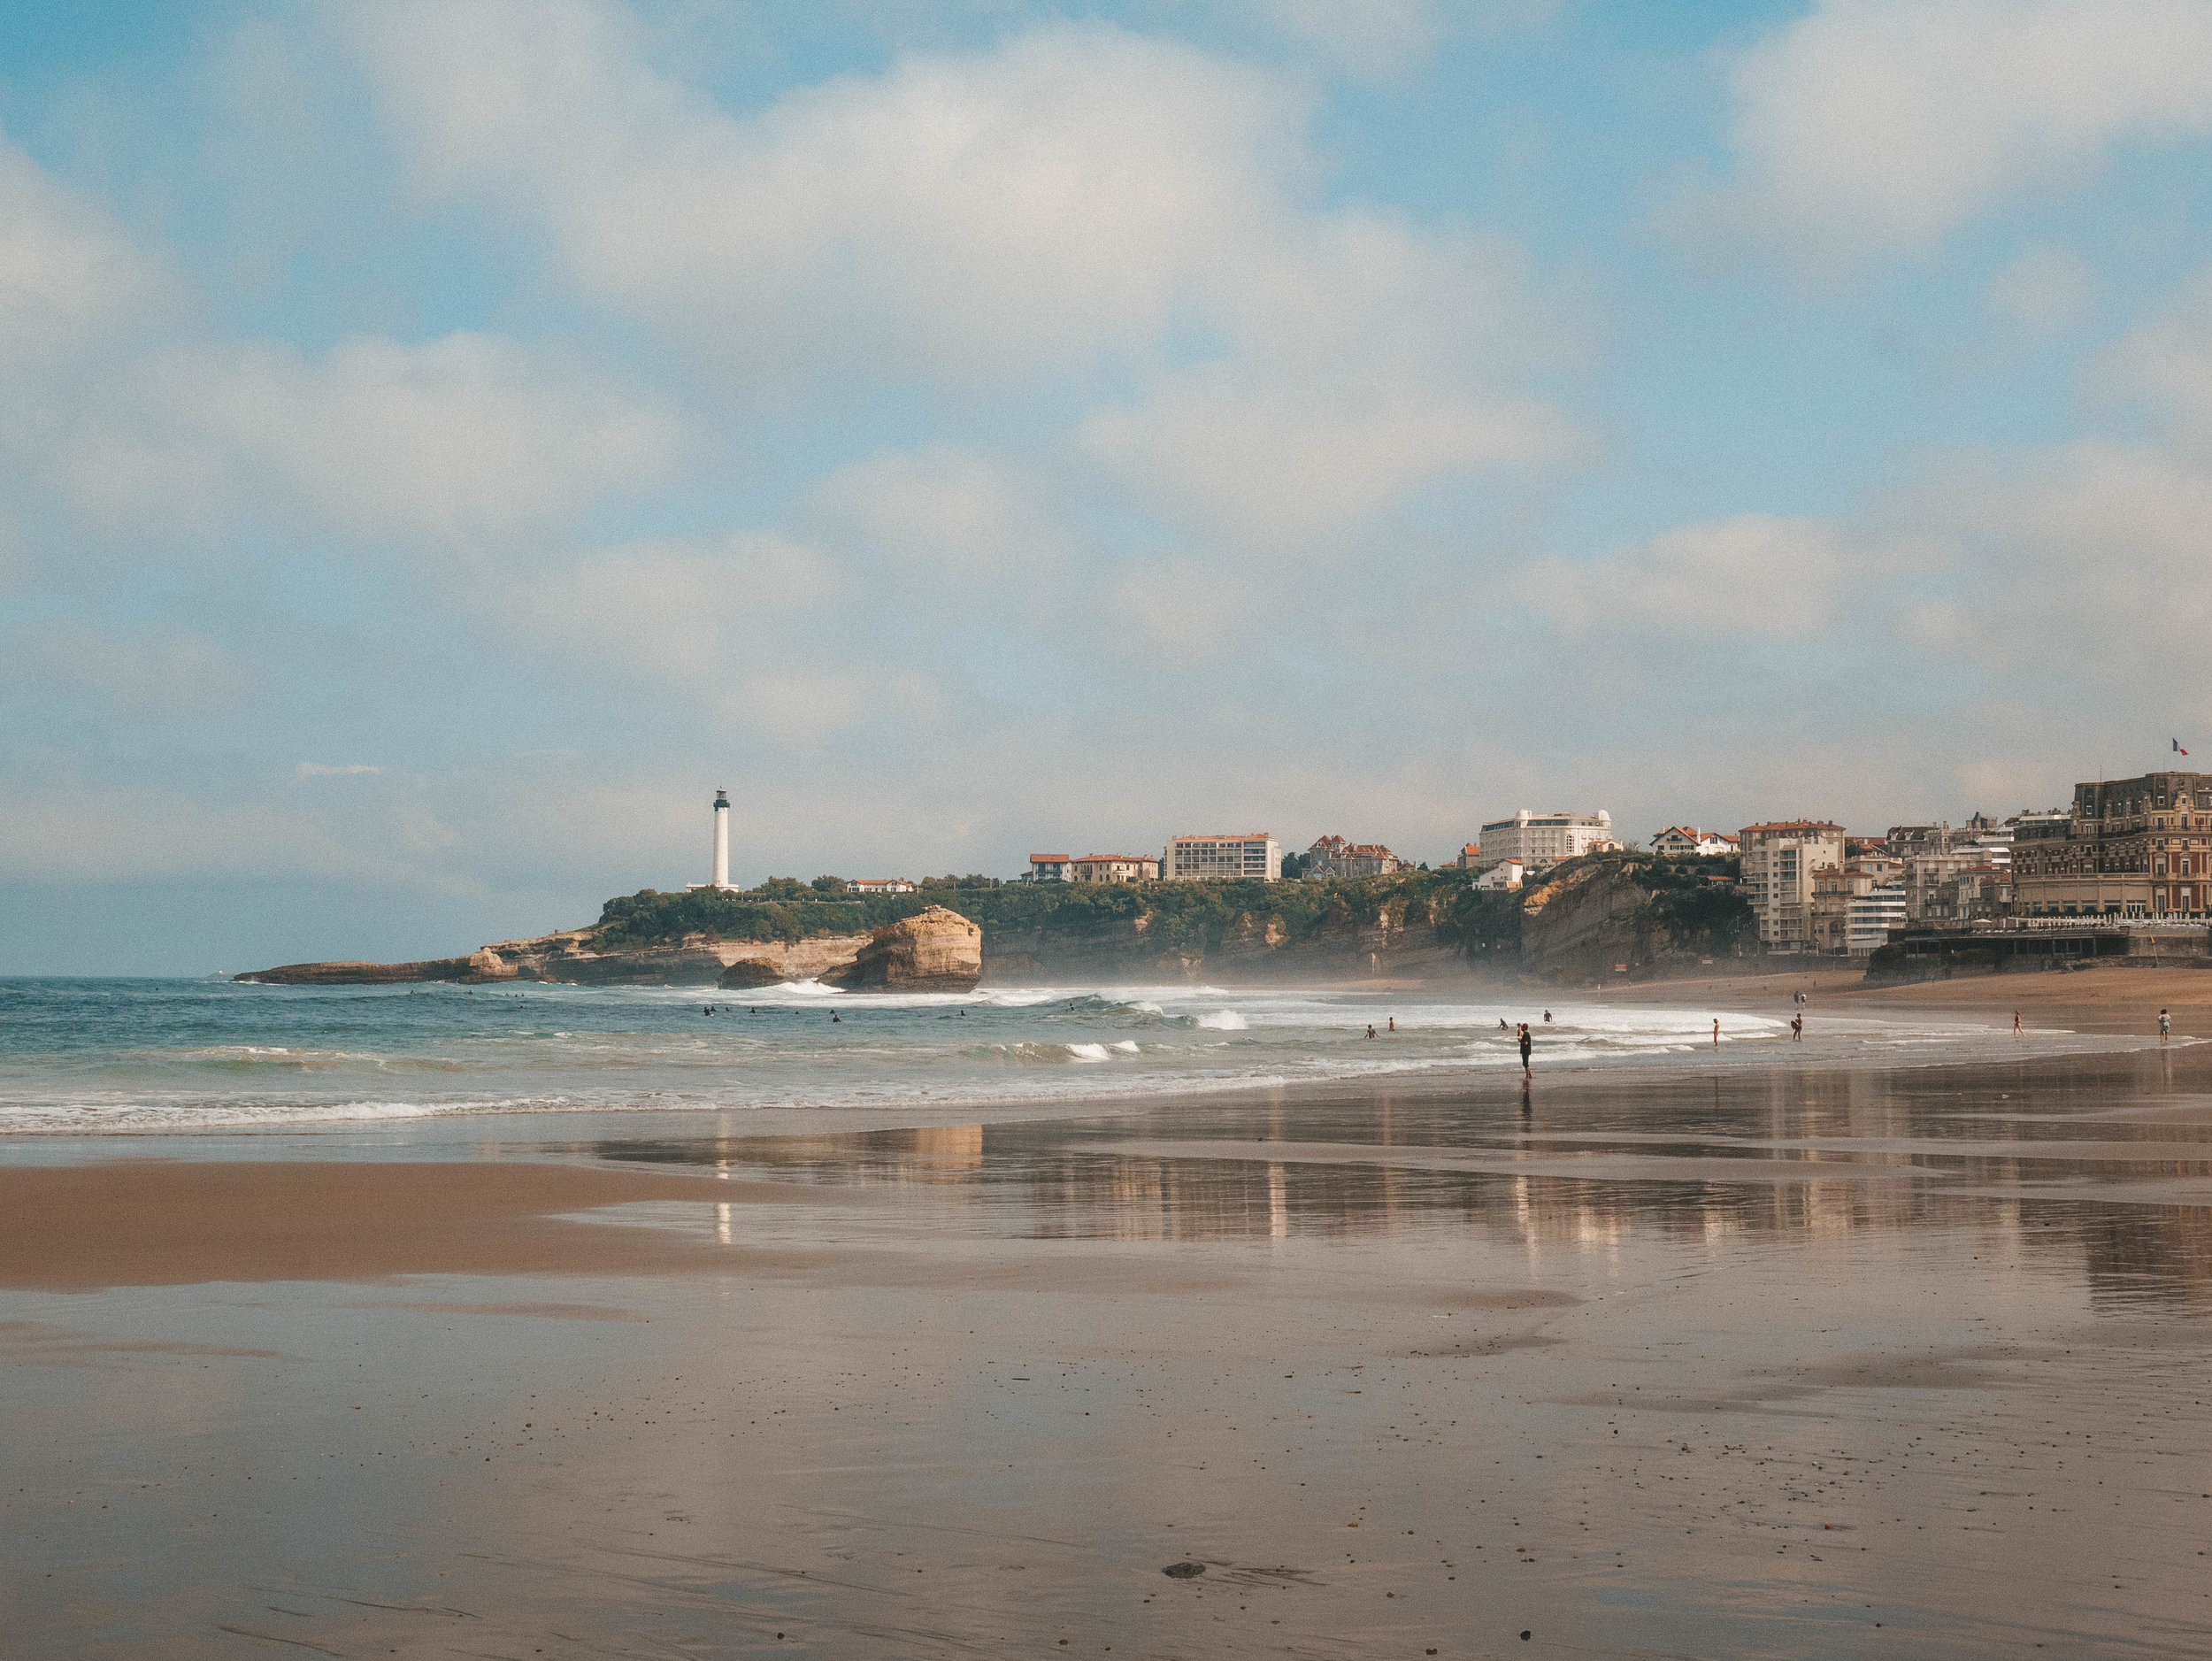 Grande Plage - Biarritz - Basque Country - France